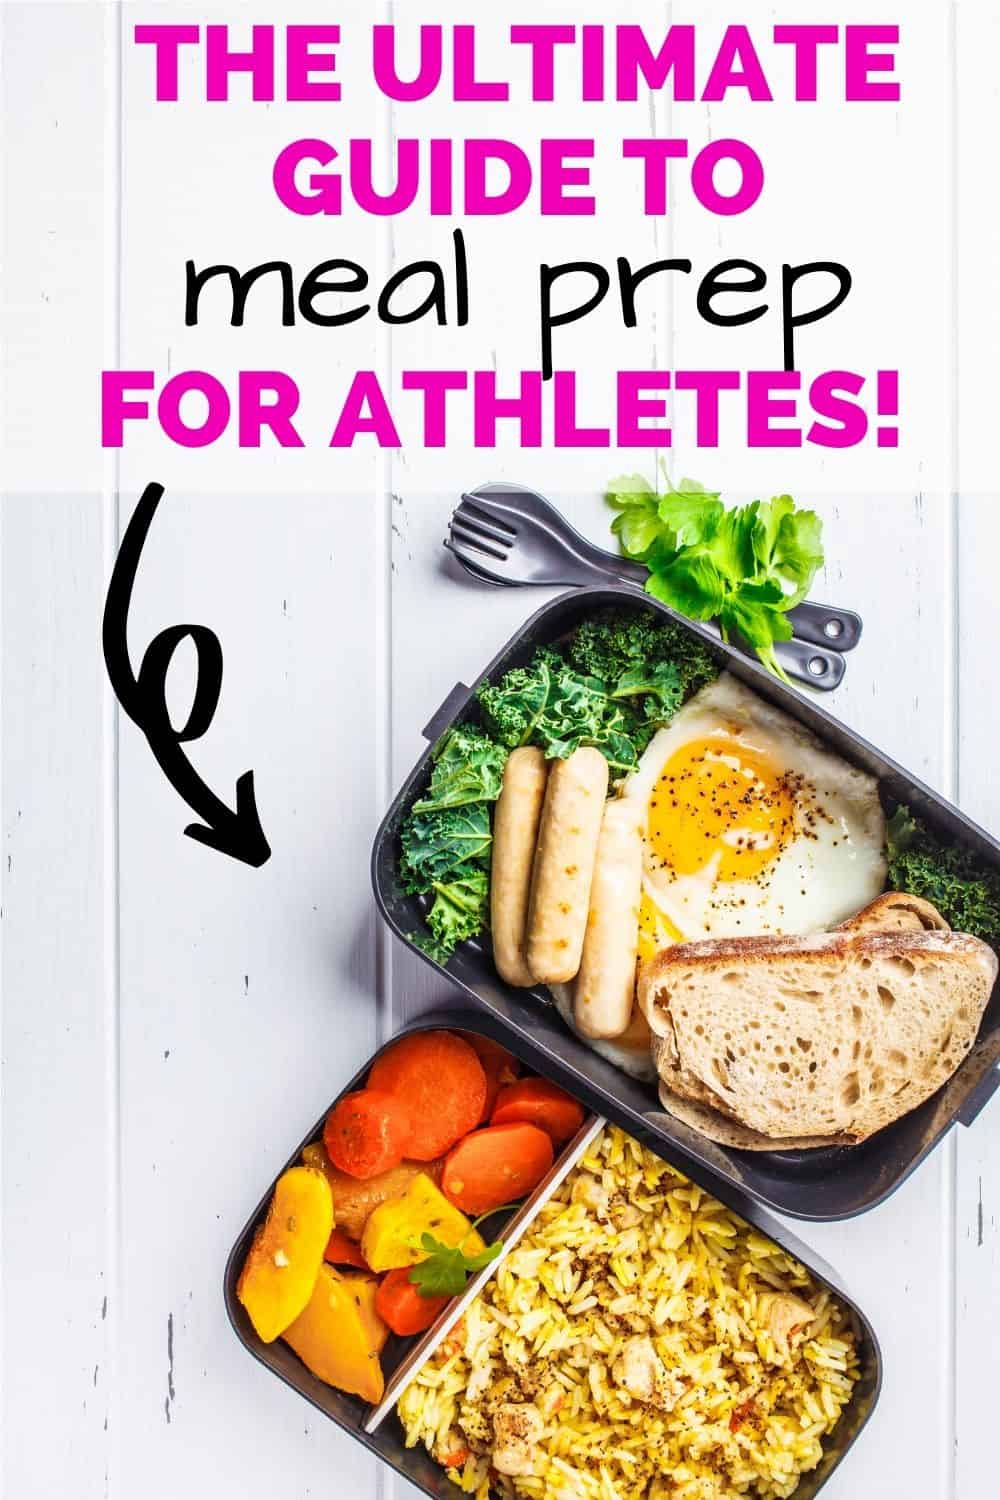 Budget-friendly meal ideas for athletes